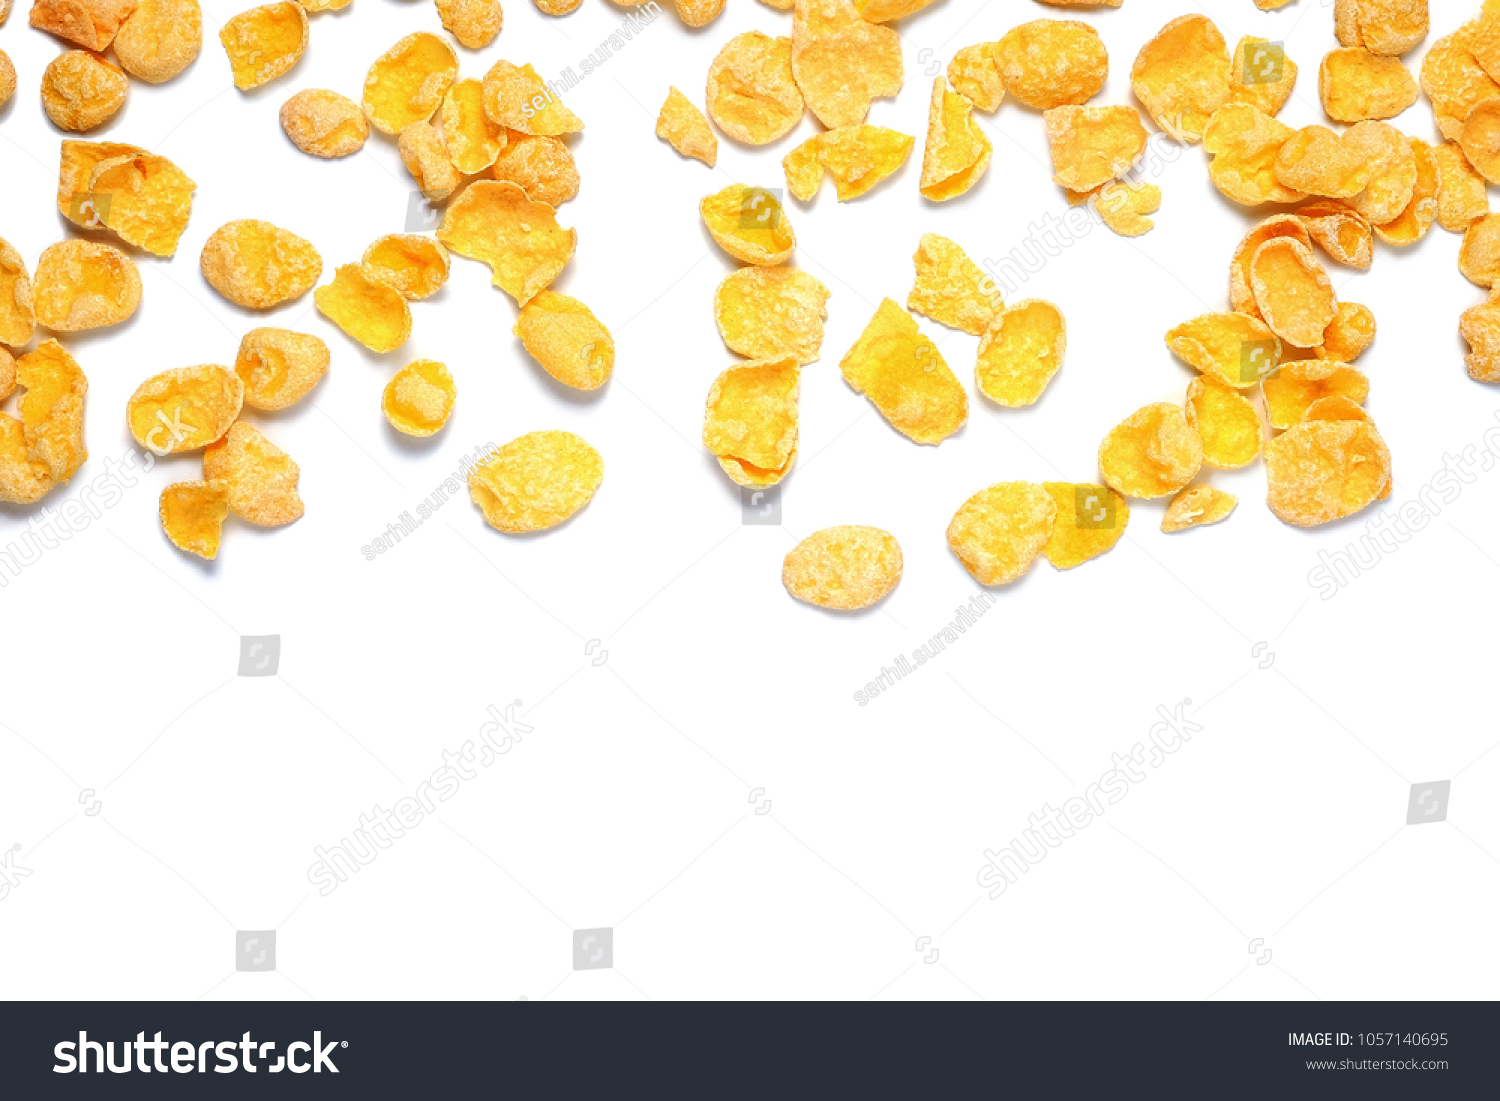 Scattered cornflakes isolated on white. Top view. #1057140695